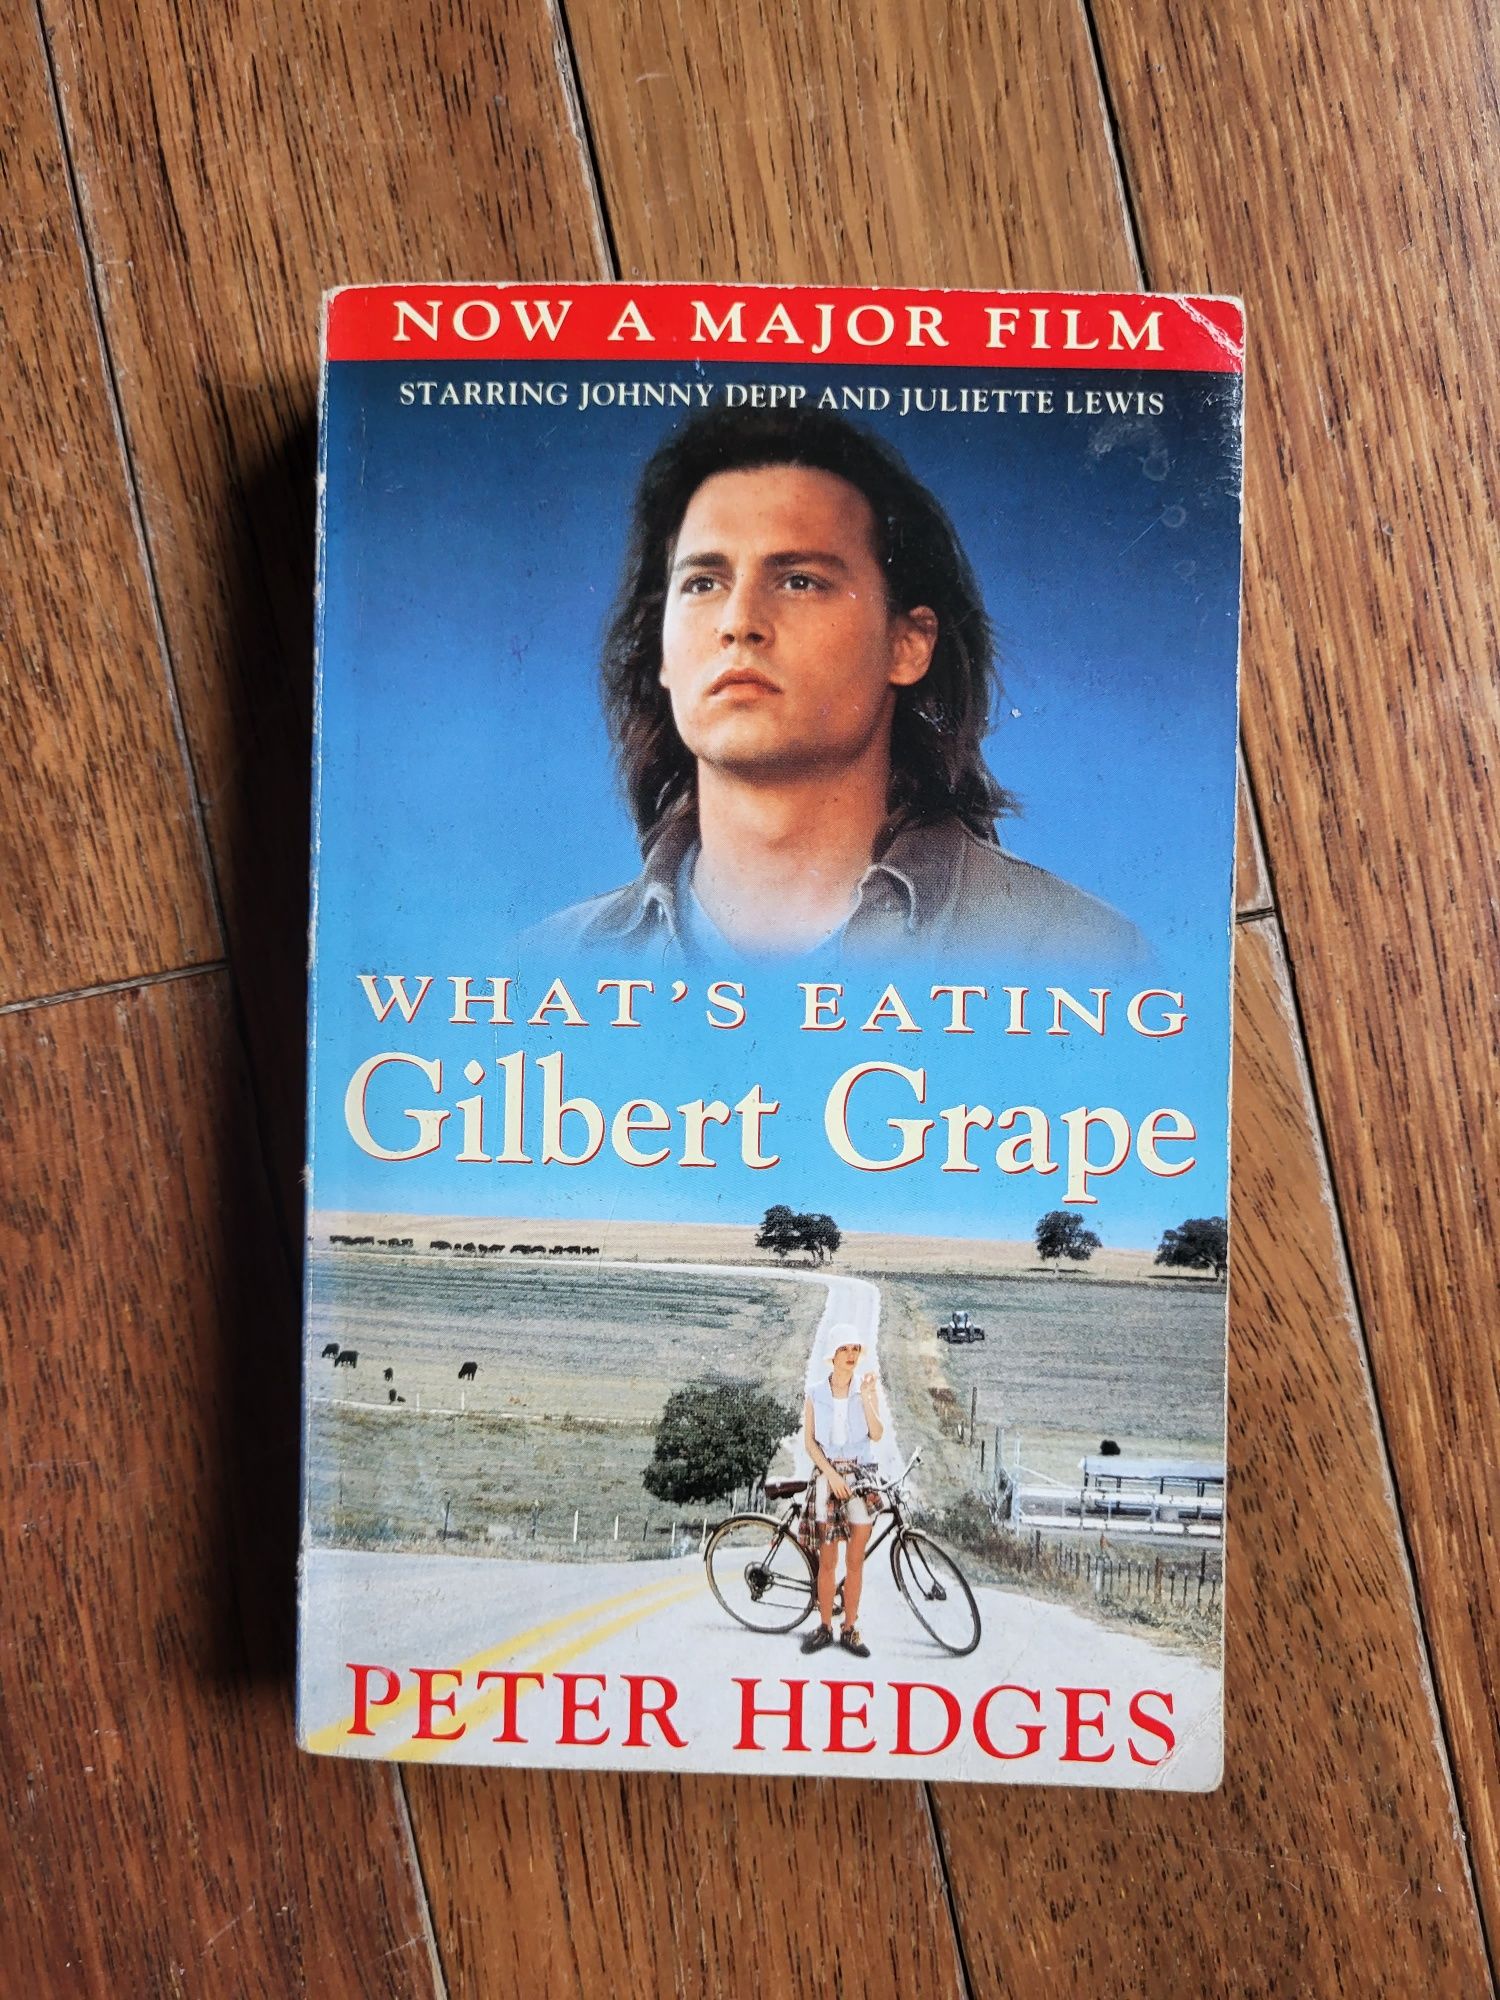 Peter Hedges - What's eating Gilbert Grape